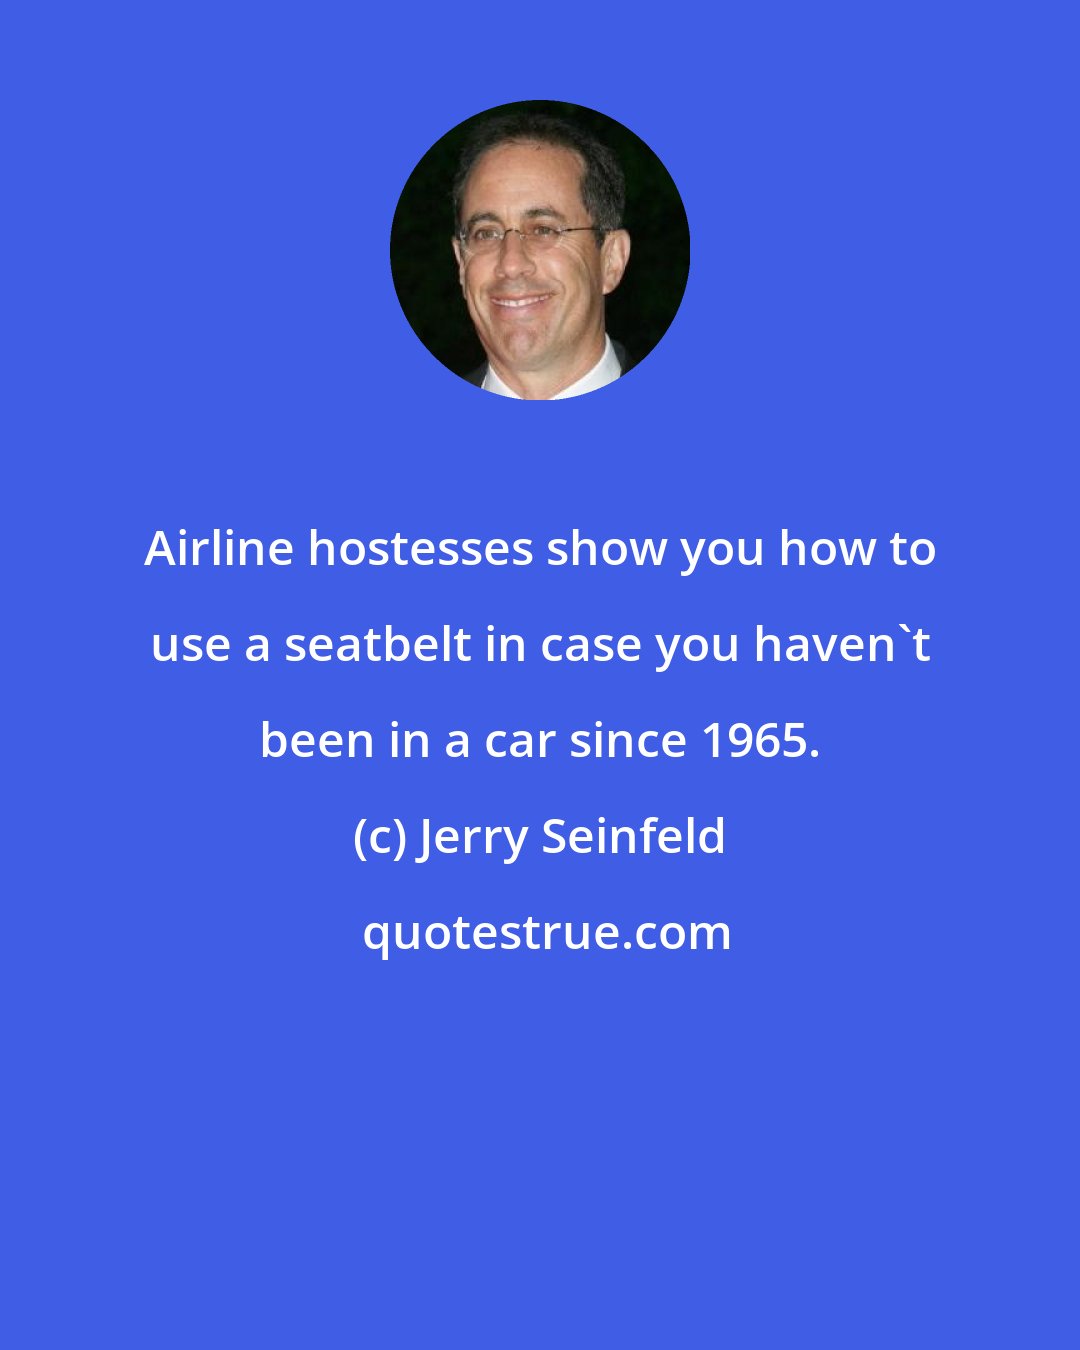 Jerry Seinfeld: Airline hostesses show you how to use a seatbelt in case you haven't been in a car since 1965.